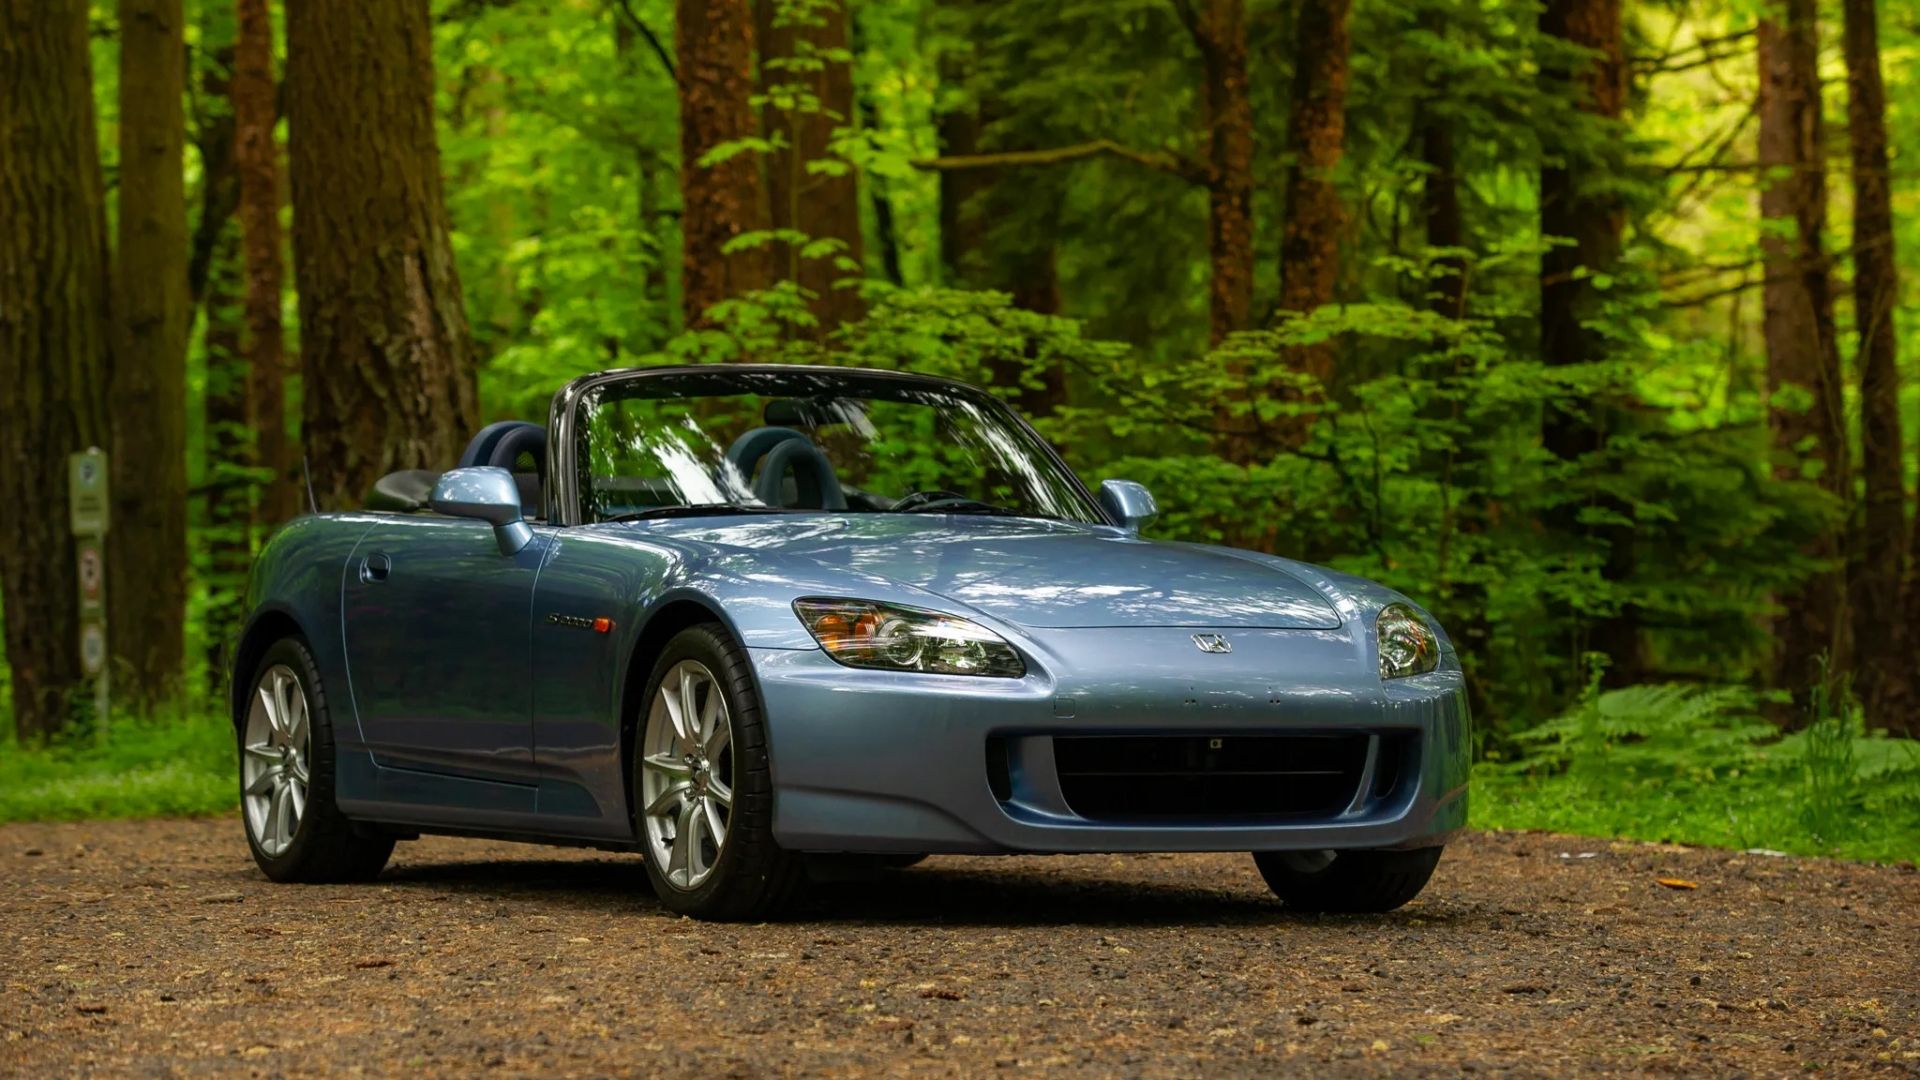 Honda S2000 in light blue parked in forest